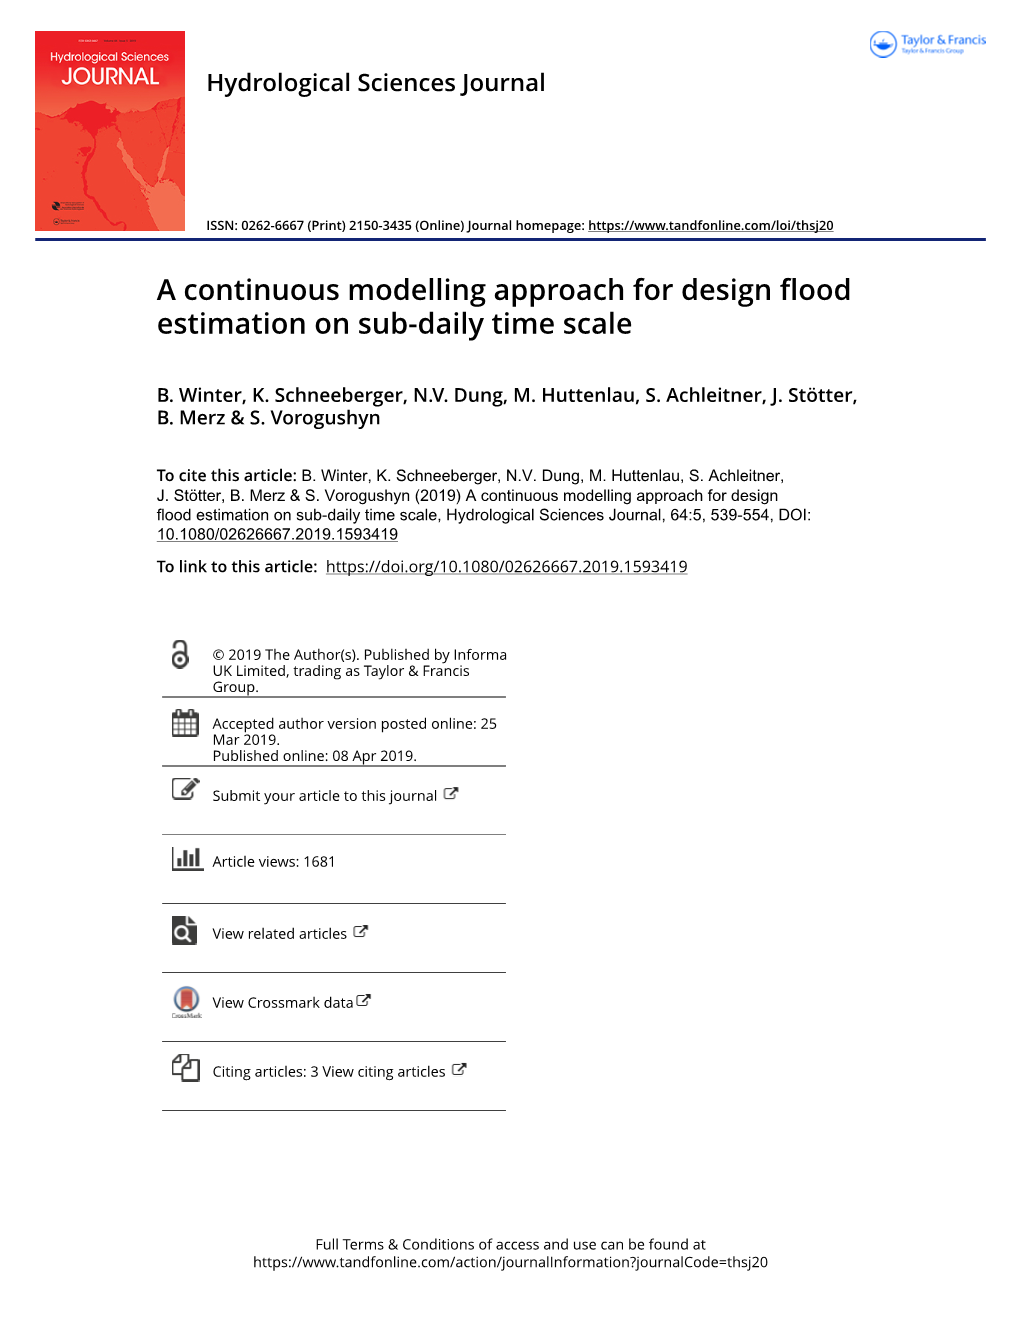 A Continuous Modelling Approach for Design Flood Estimation on Sub-Daily Time Scale